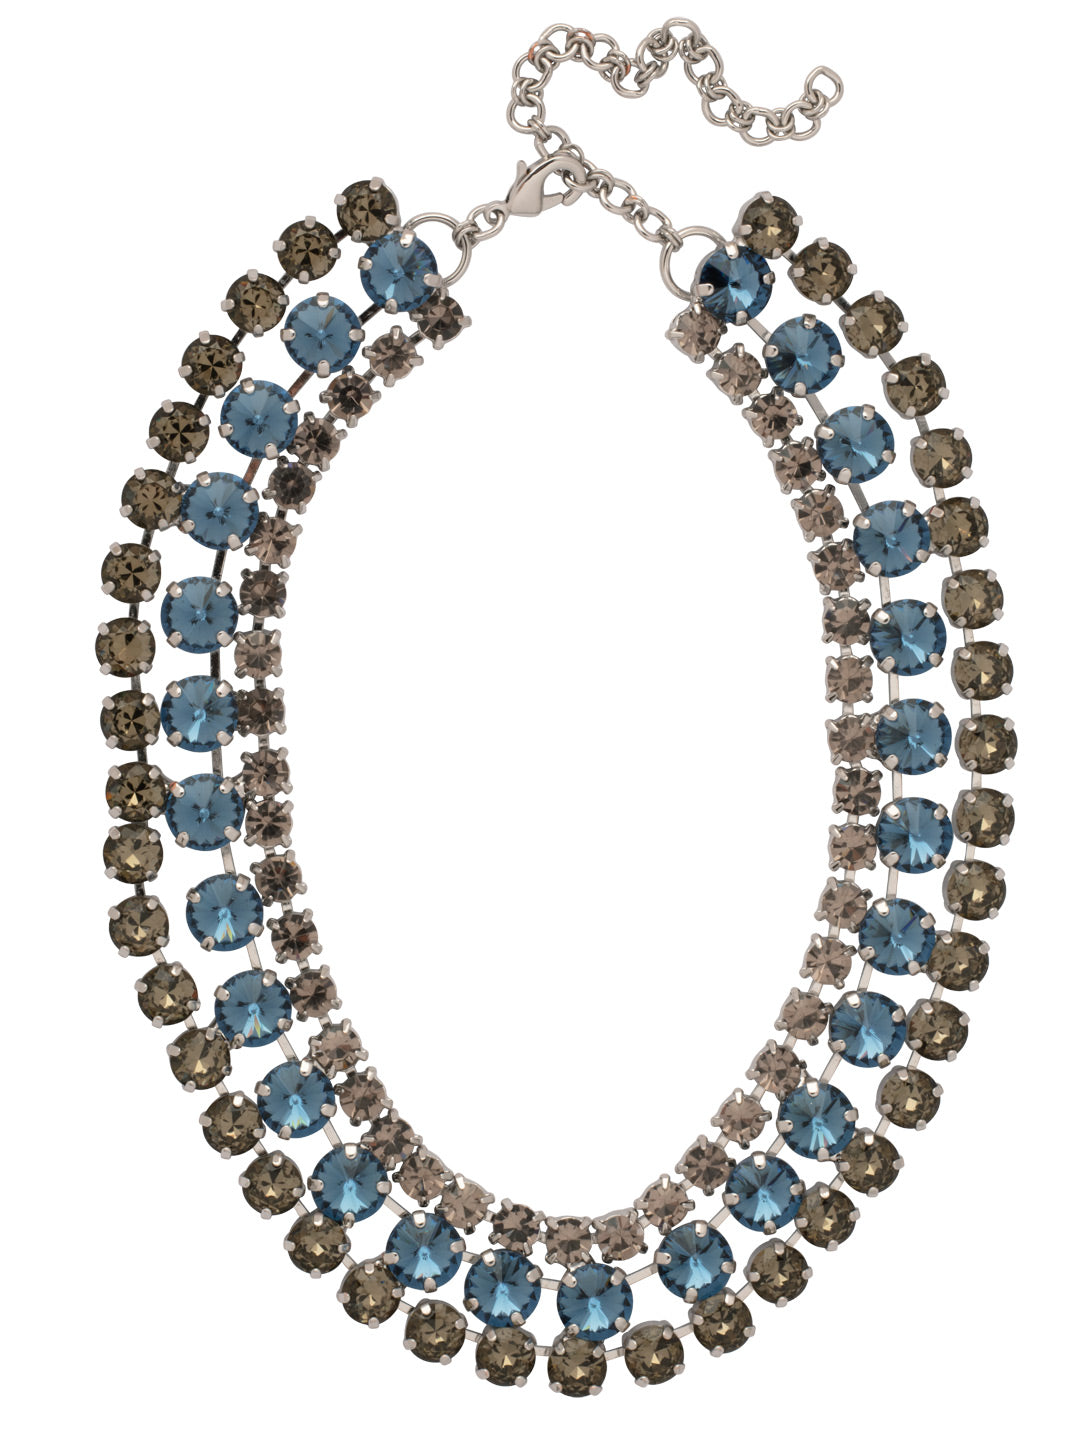 Sloane Layered Statement Necklace - NFL60PDASP - <p>The Sloane Layered Statement Necklace features three line necklaces layered as one, with various sizes and shapes of crystals. From Sorrelli's Aspen SKY collection in our Palladium finish.</p>